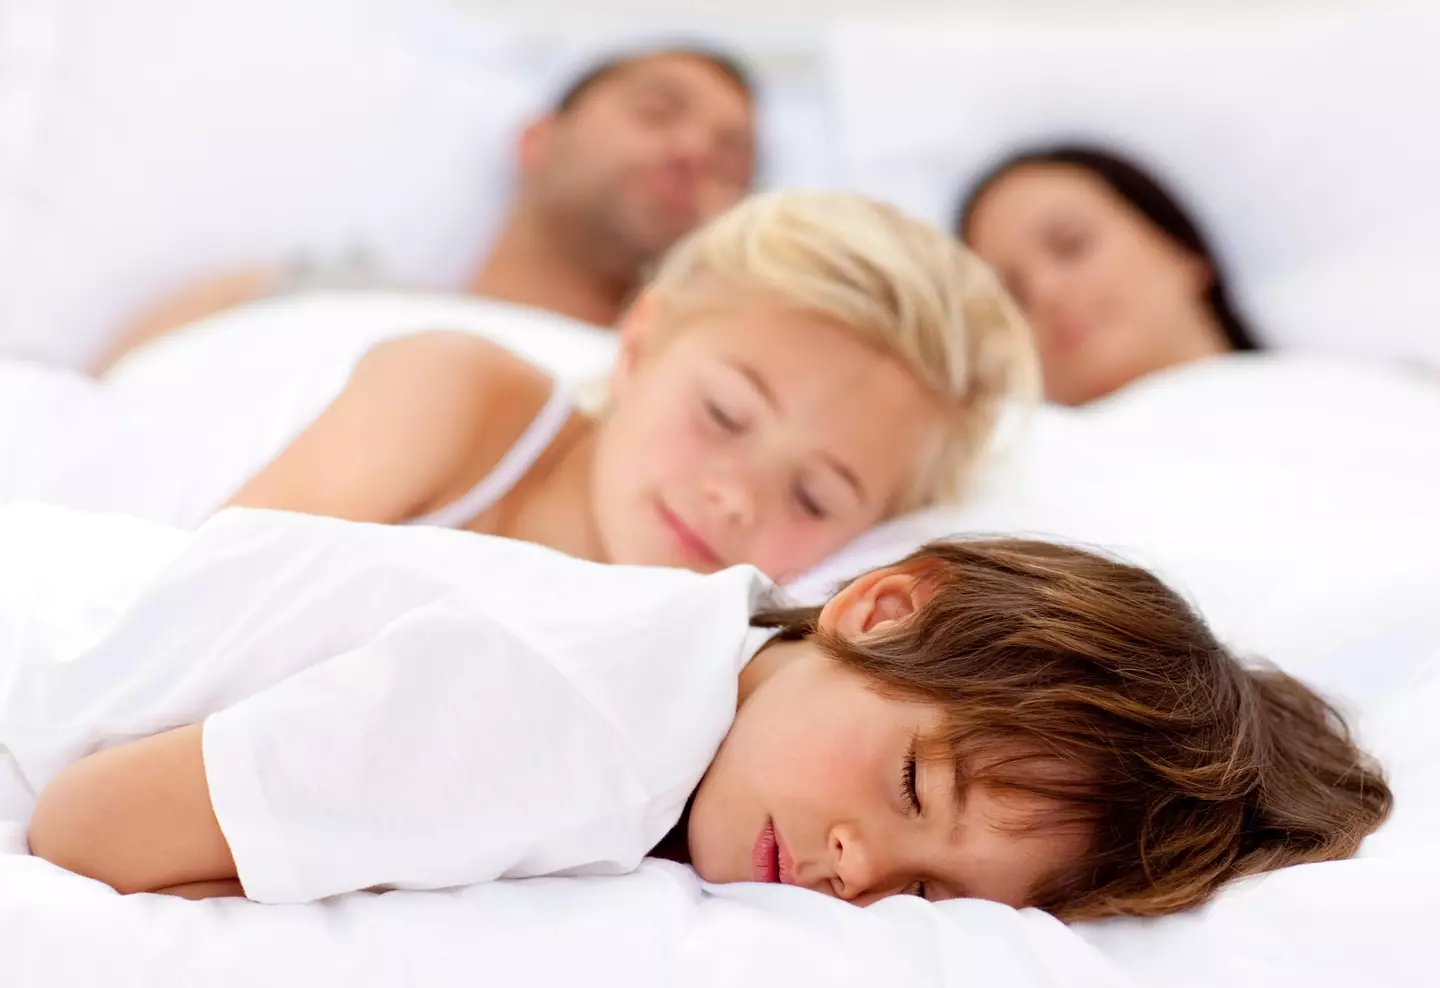 Parents are sharing why they let their children sleep in their bed.